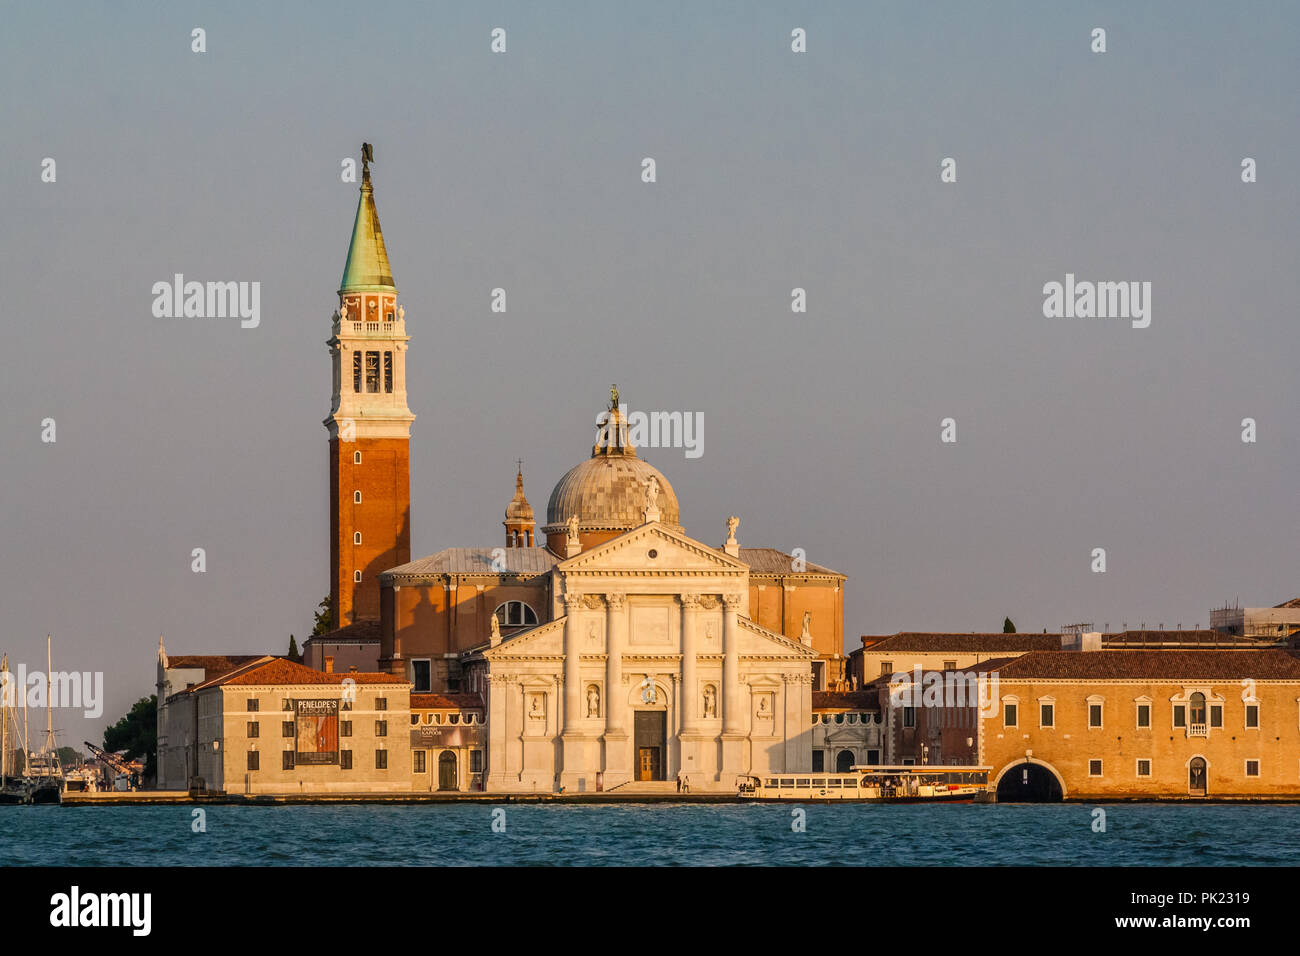 Doges palace and St Marks Basilica, Venice, Italy in the evening light. Stock Photo